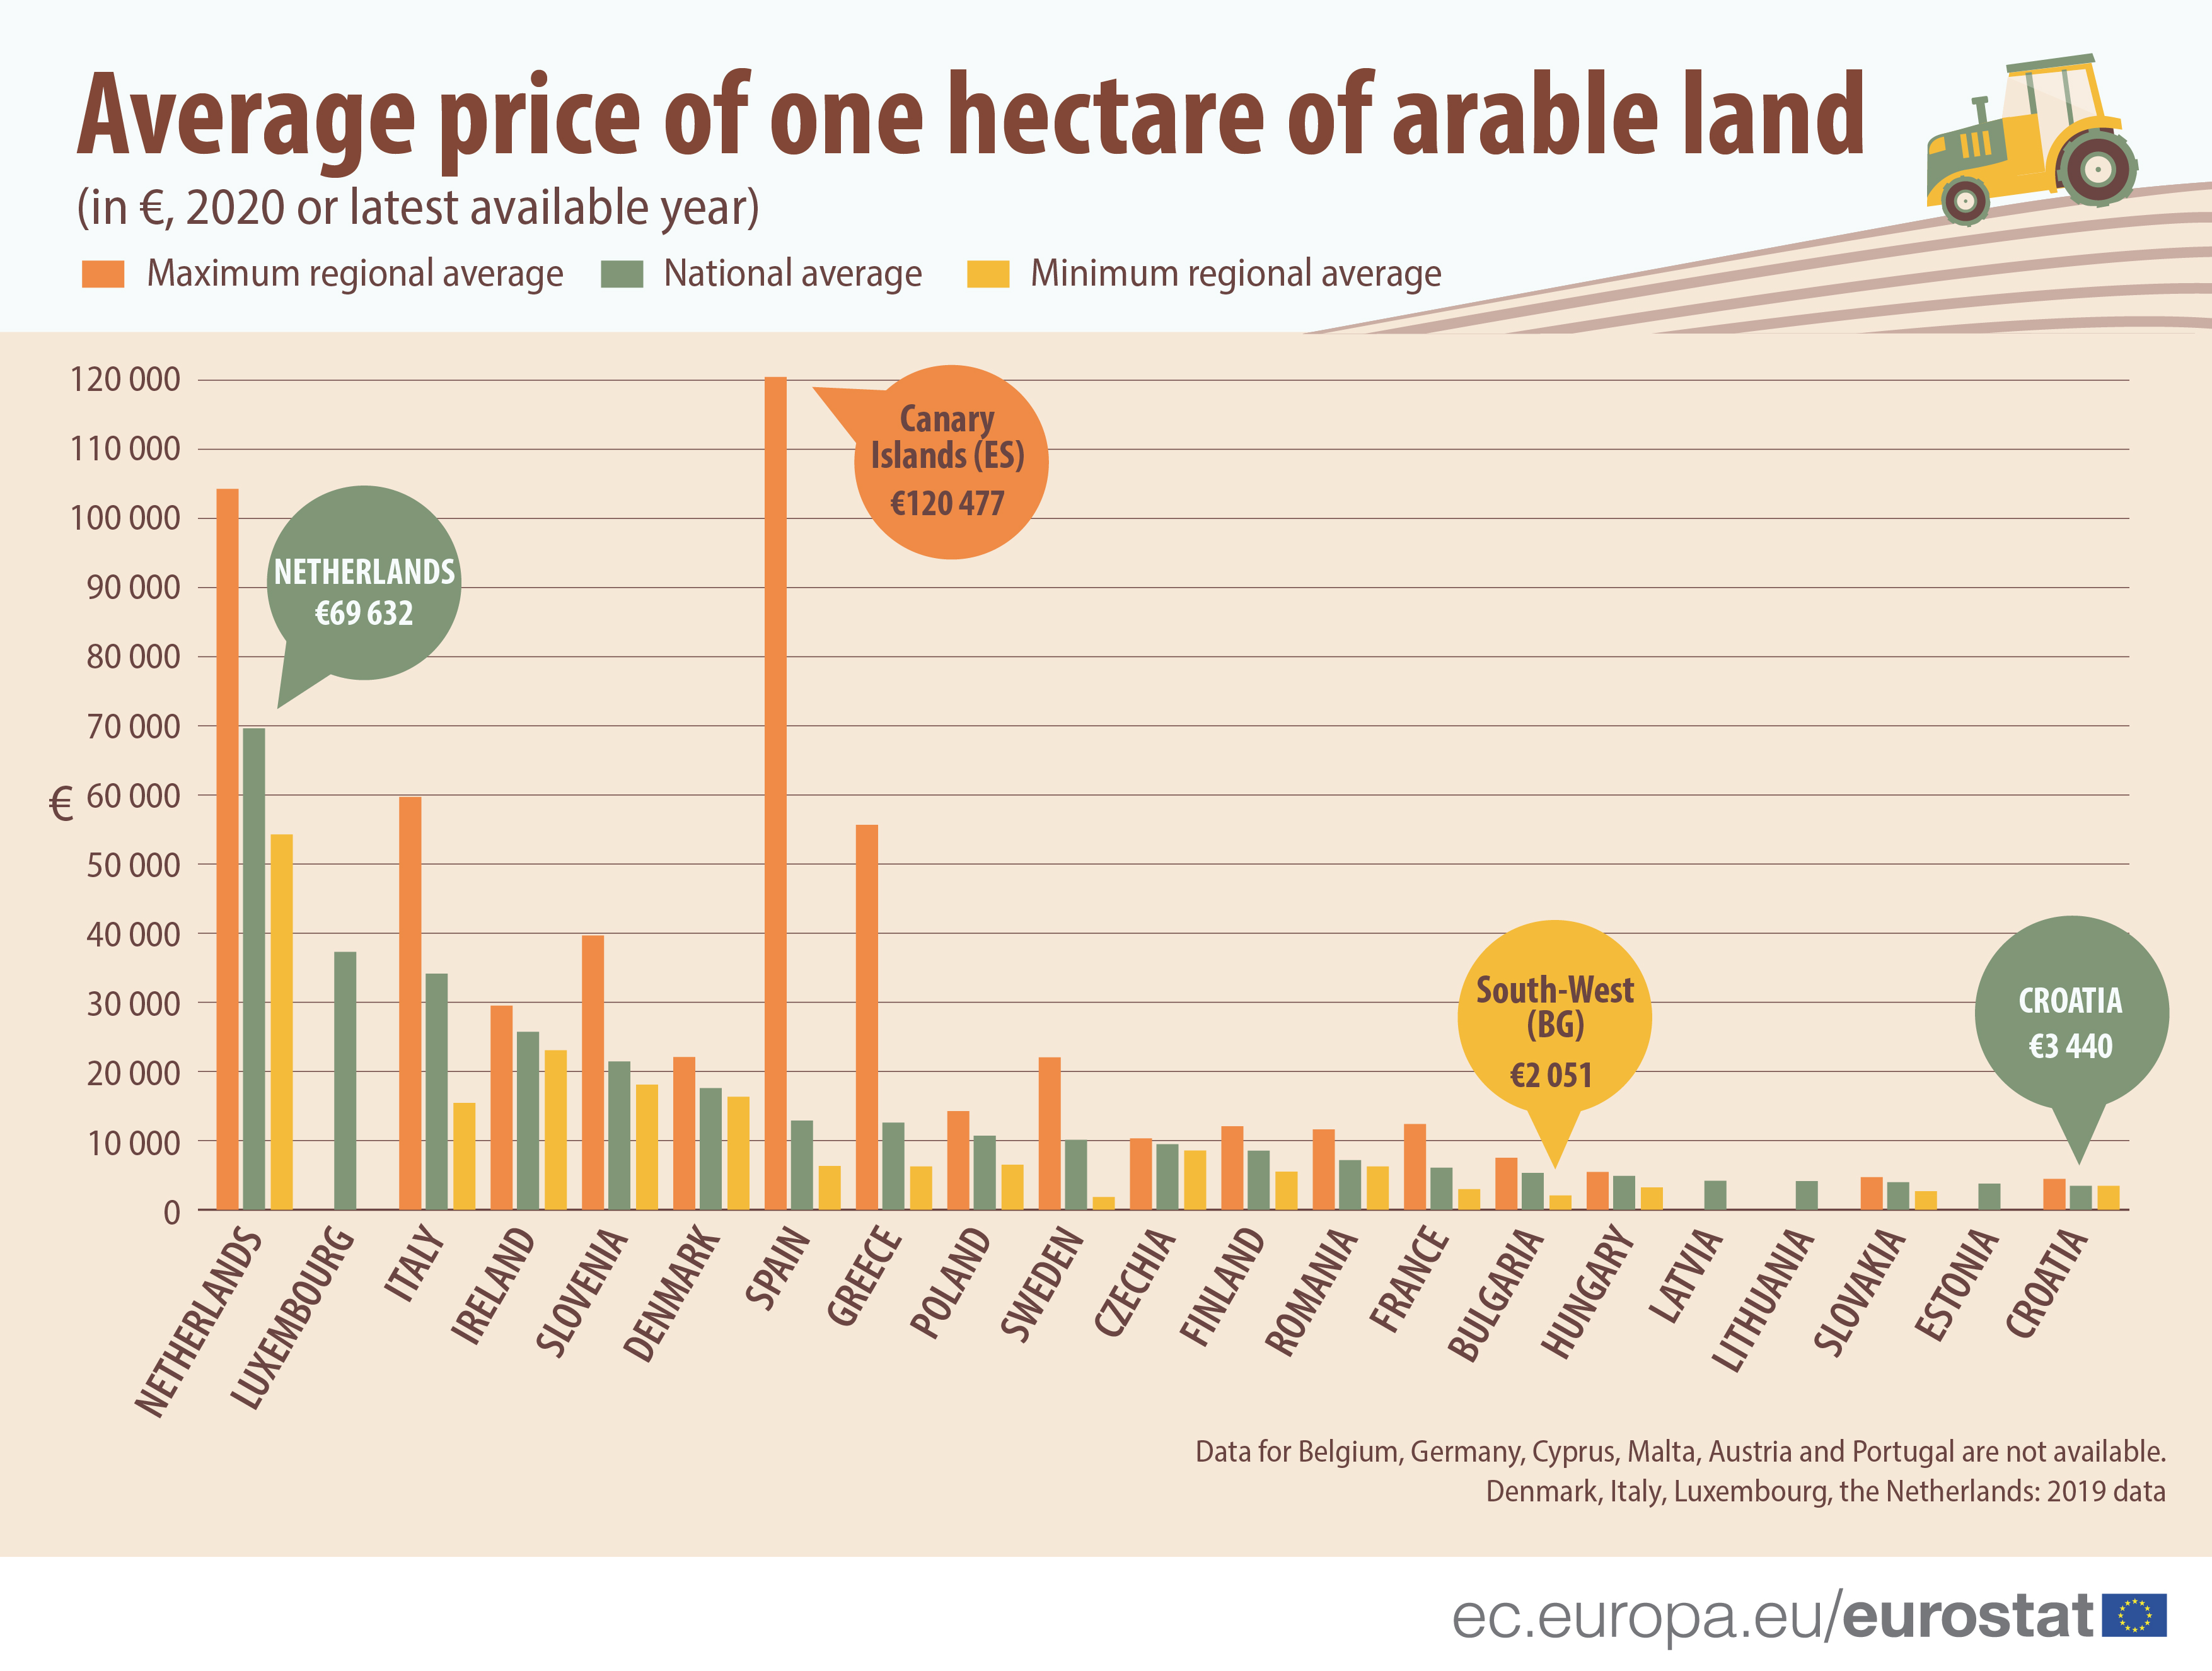  Average agricultural land prices across the EU countries/regions, EUR per hectare, 2020 data or latest year available 